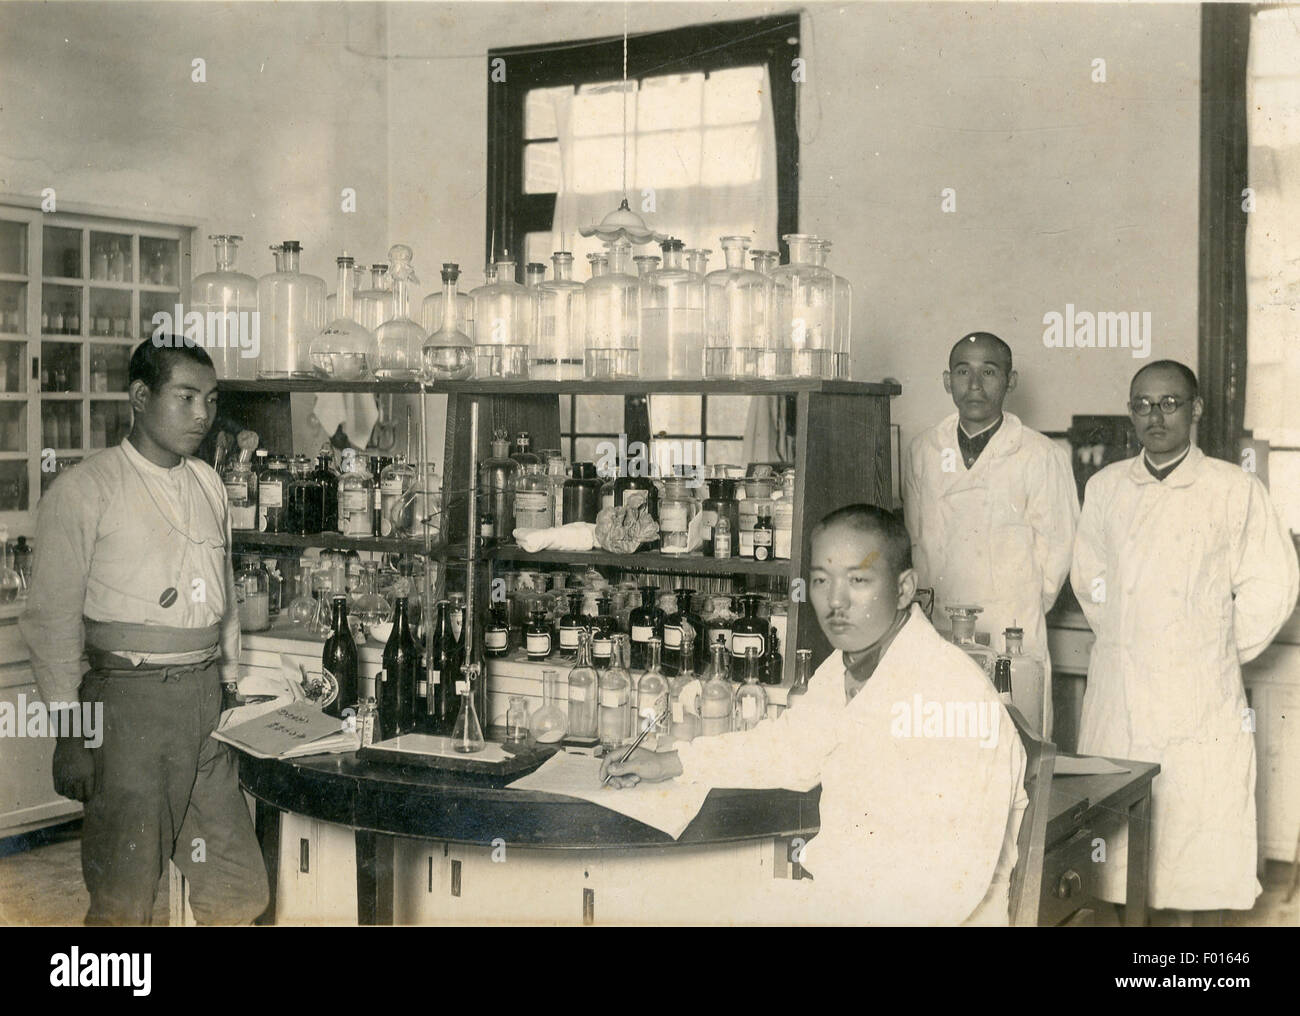 Beijing, China. 6th Aug, 2015. File photo shows the lab of germ warfare Unit A 1855 in Beijing, China. Invading Japanese troops set up 60 germ warfare units involved more than 10,000 troops from 1932 to 1945 in China and victimized at least 270,000 Chinese civilians. Japanese troops, including notorious Unit 731, developed and produced germ weapons based on bacteria experiments on human bodies and used germ weapons against Chinese civilians in battles and released plague, anthracnose and glanders on Chinese mountains, forests, rivers and fields. © Xinhua/Alamy Live News Stock Photo